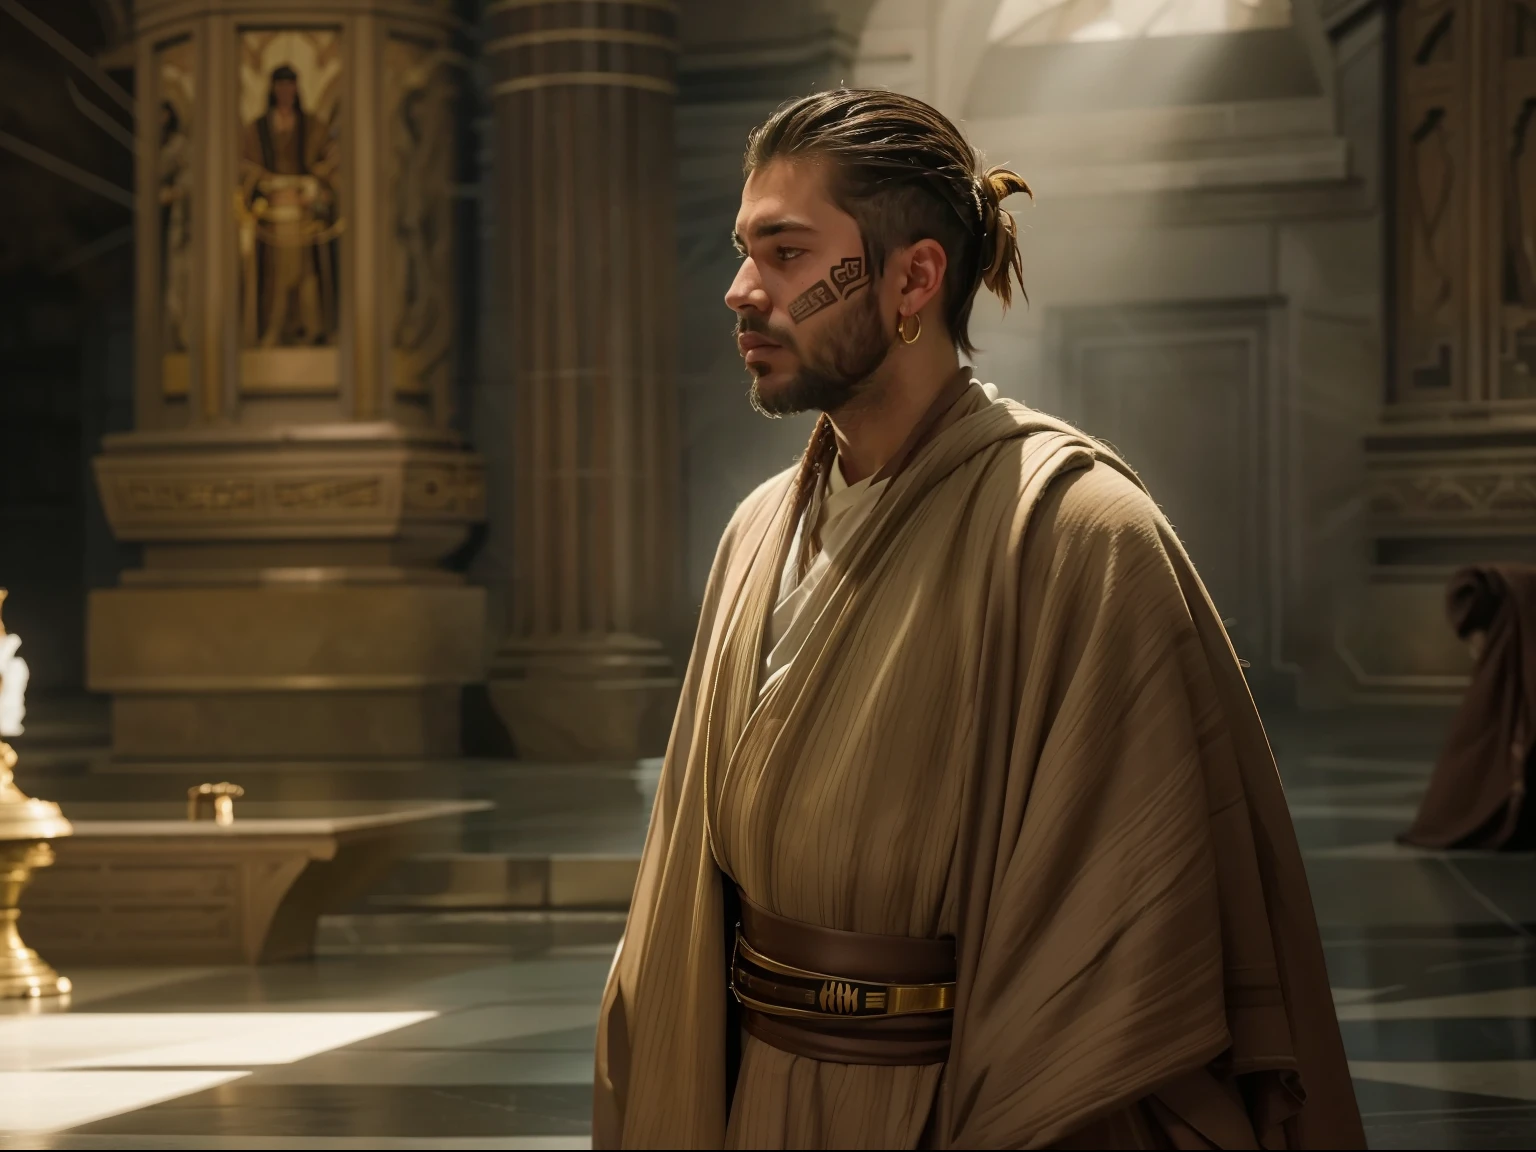 **Valen Rix, male character with olive skin, black eyes and tribal facial tattoos traditional to the Mirialan culture. He wears a brown robe with gold trim, traditional Jedi style. In his right hand he wields a green lightsaber. He is training with other Jedi in the great hall of the Jedi Temple, which has tall pillars made of white marble and granite floors of the same color. Rays of sunlight enter through the temple's stained-glass windows